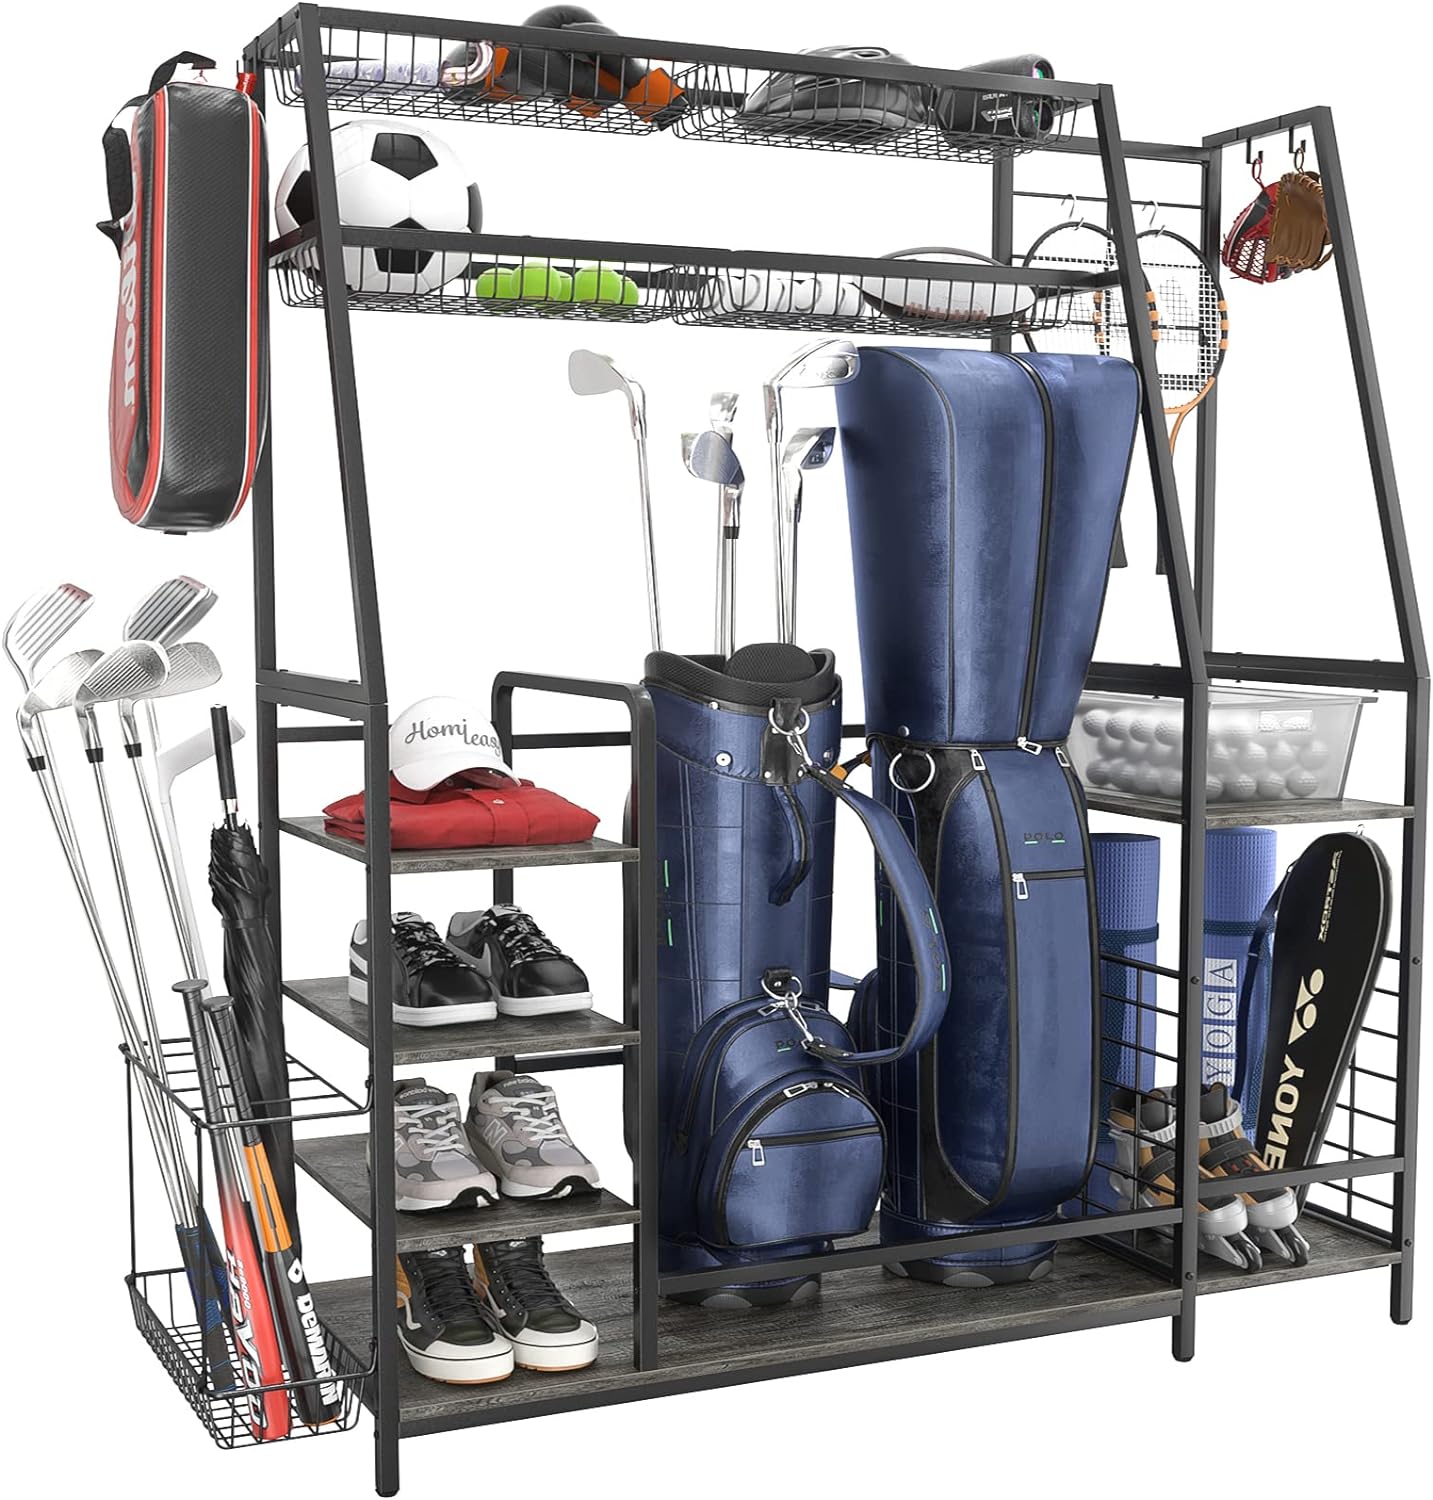 Homieasy Golf Storage Garage Organizer Fits for 2 Golf Bags, Large Golf Equipment Storage Rack with Baskets and Hooks, Sturdy Steel Wood Golf Accessories for Clubs, Garage, Basement